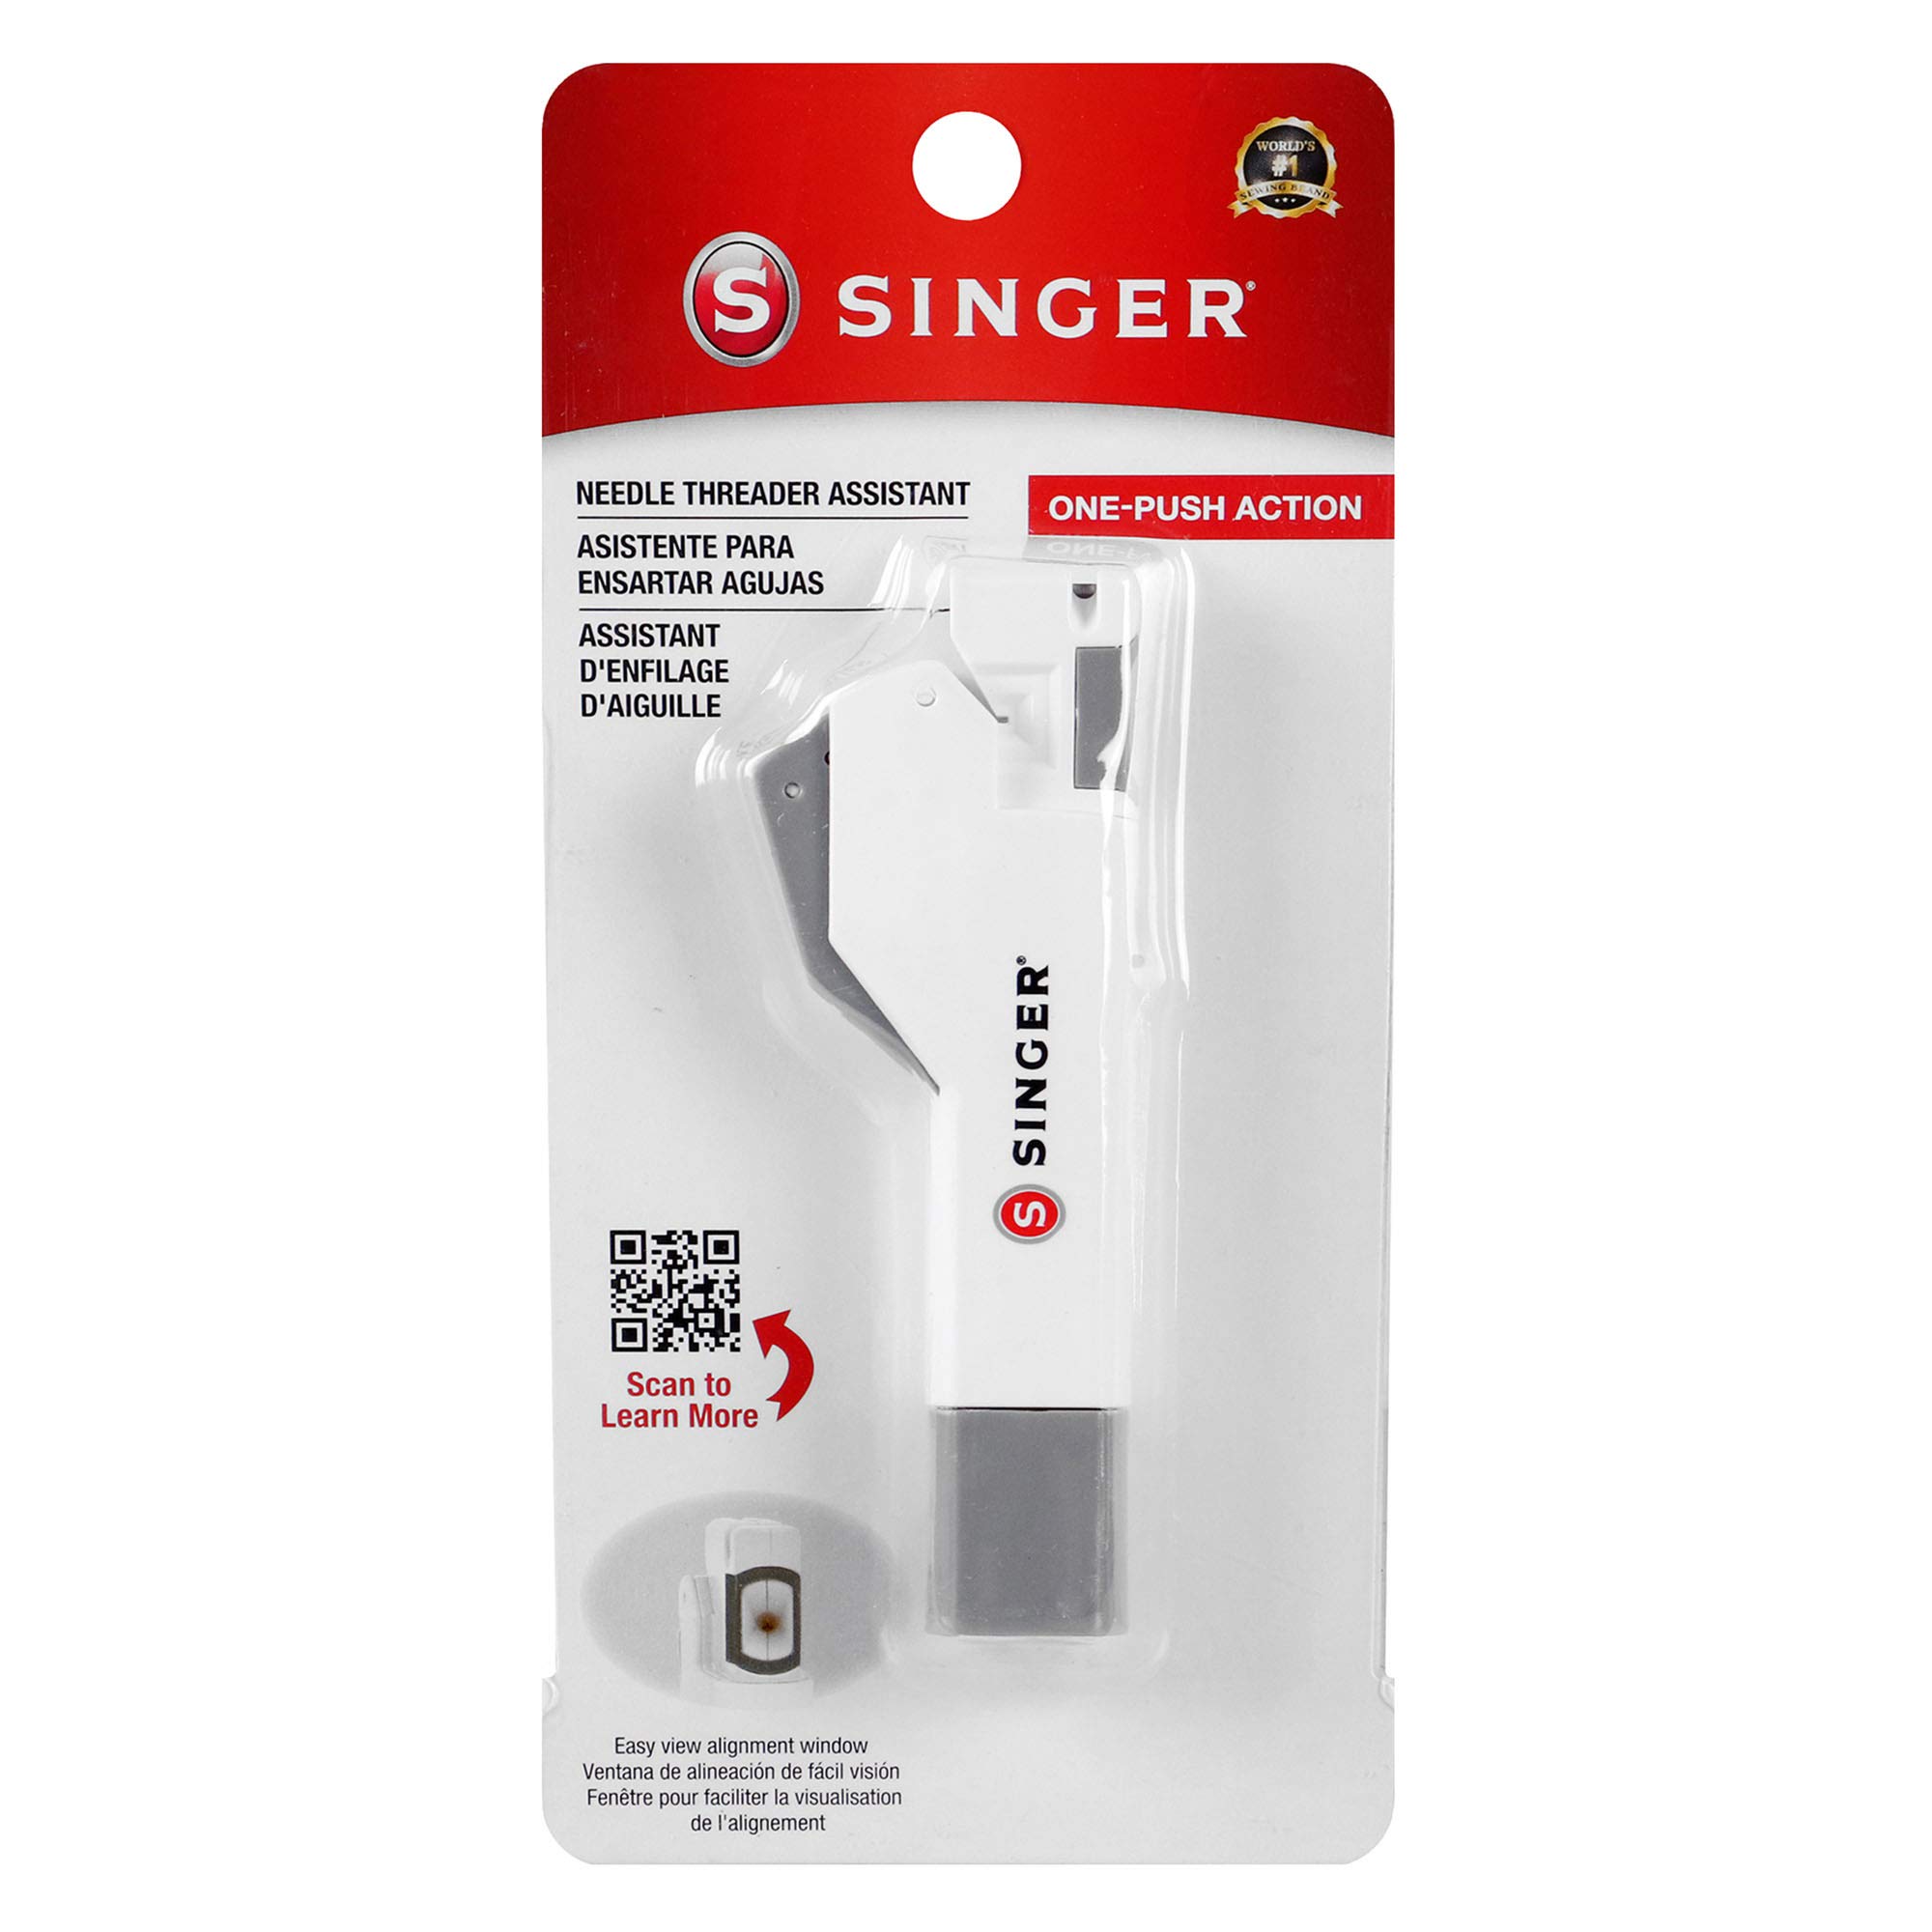 SINGER Needle Threader Assistant - Automatic Hand Sewing Needle Threader,Gray